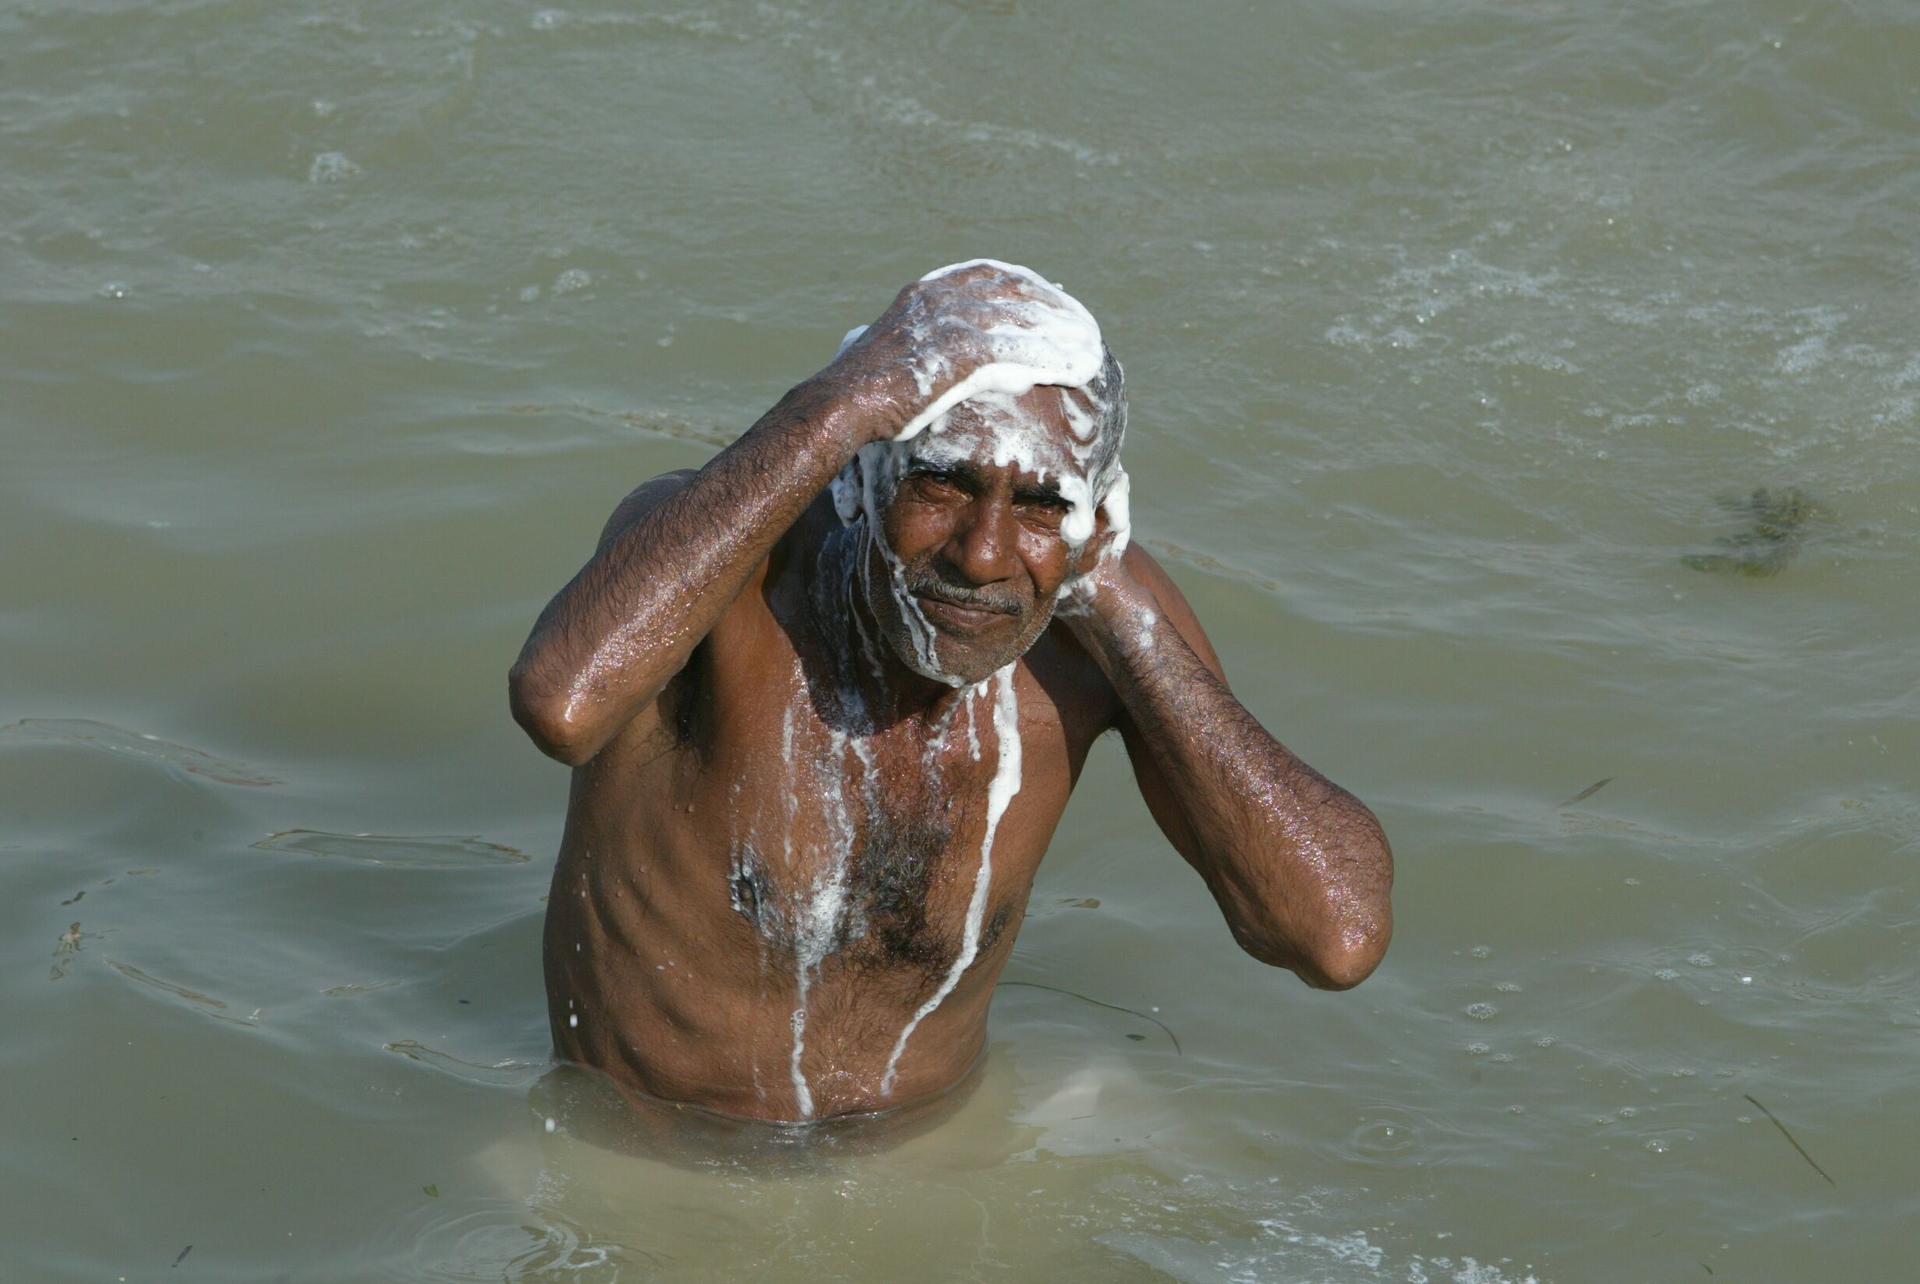 An Iraqi man bathes himself in a canal in Iraq's second largest city Basra, when electricity was cut off, August 11, 2003